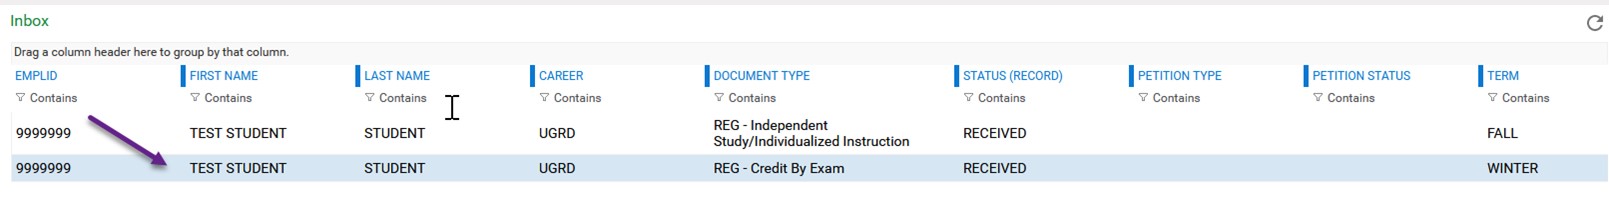 Chair Review of Credit by Exam Request 6